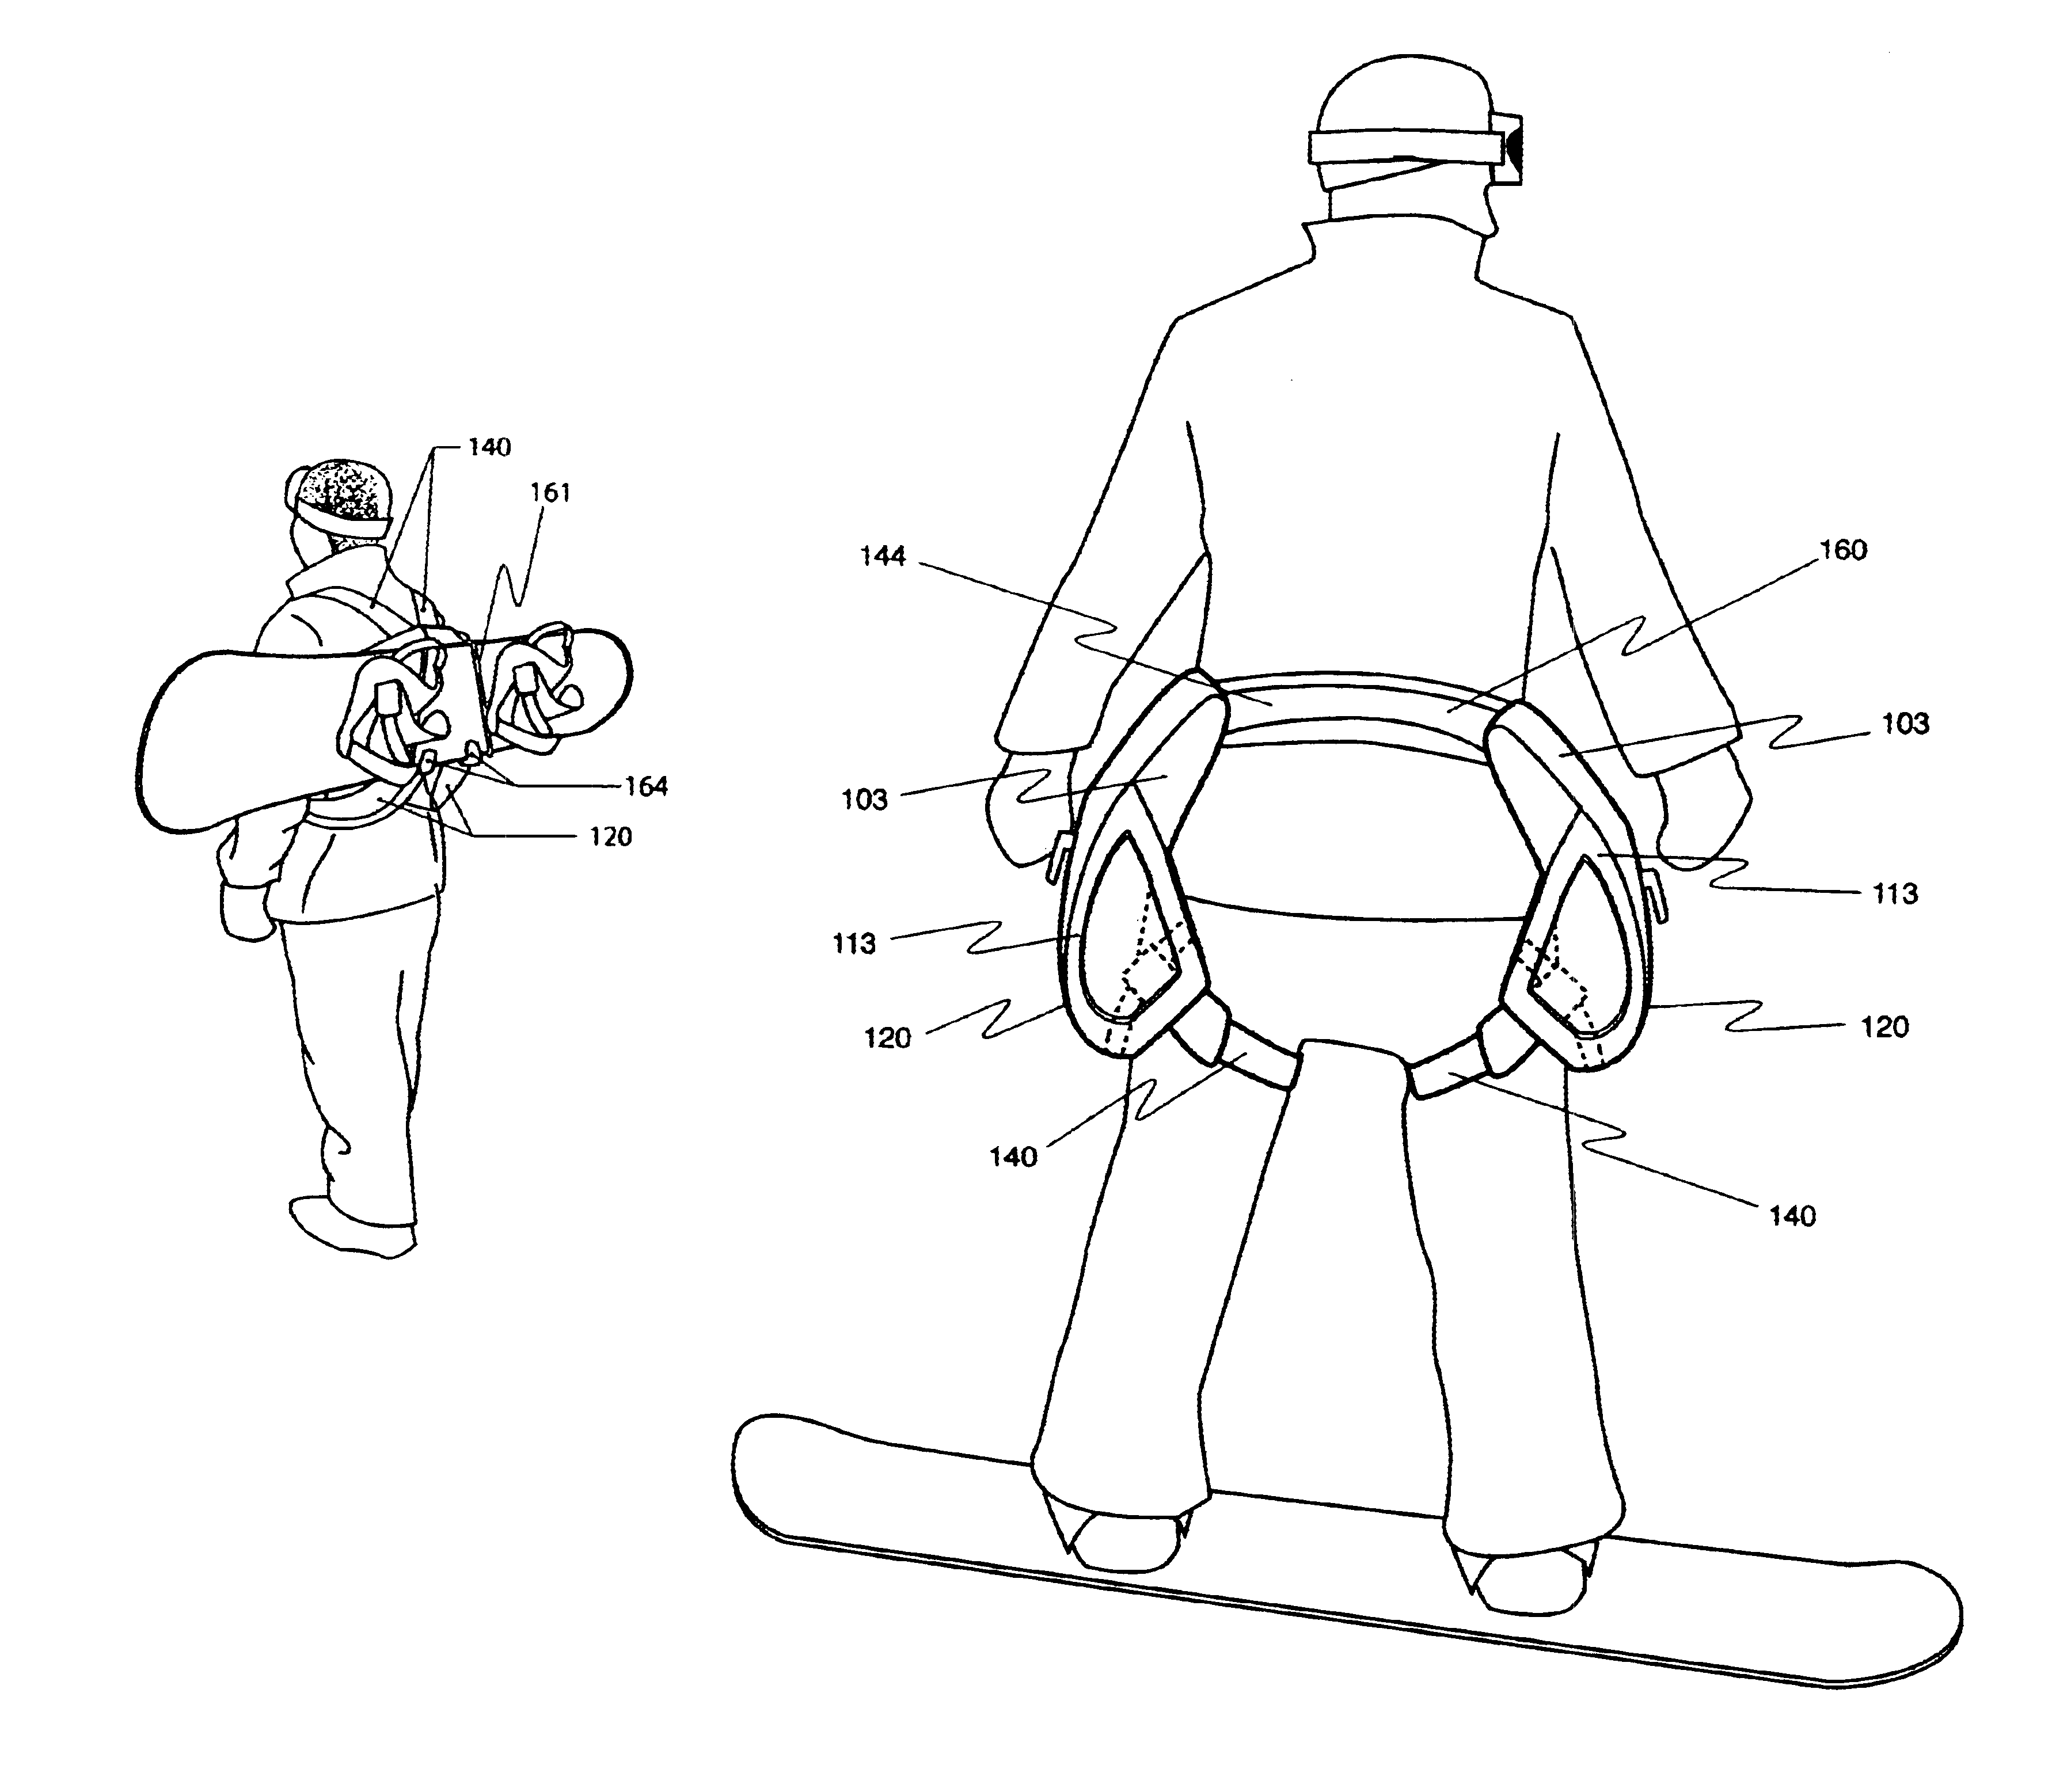 Bifurcated carrier pack for transporting recreational equipment